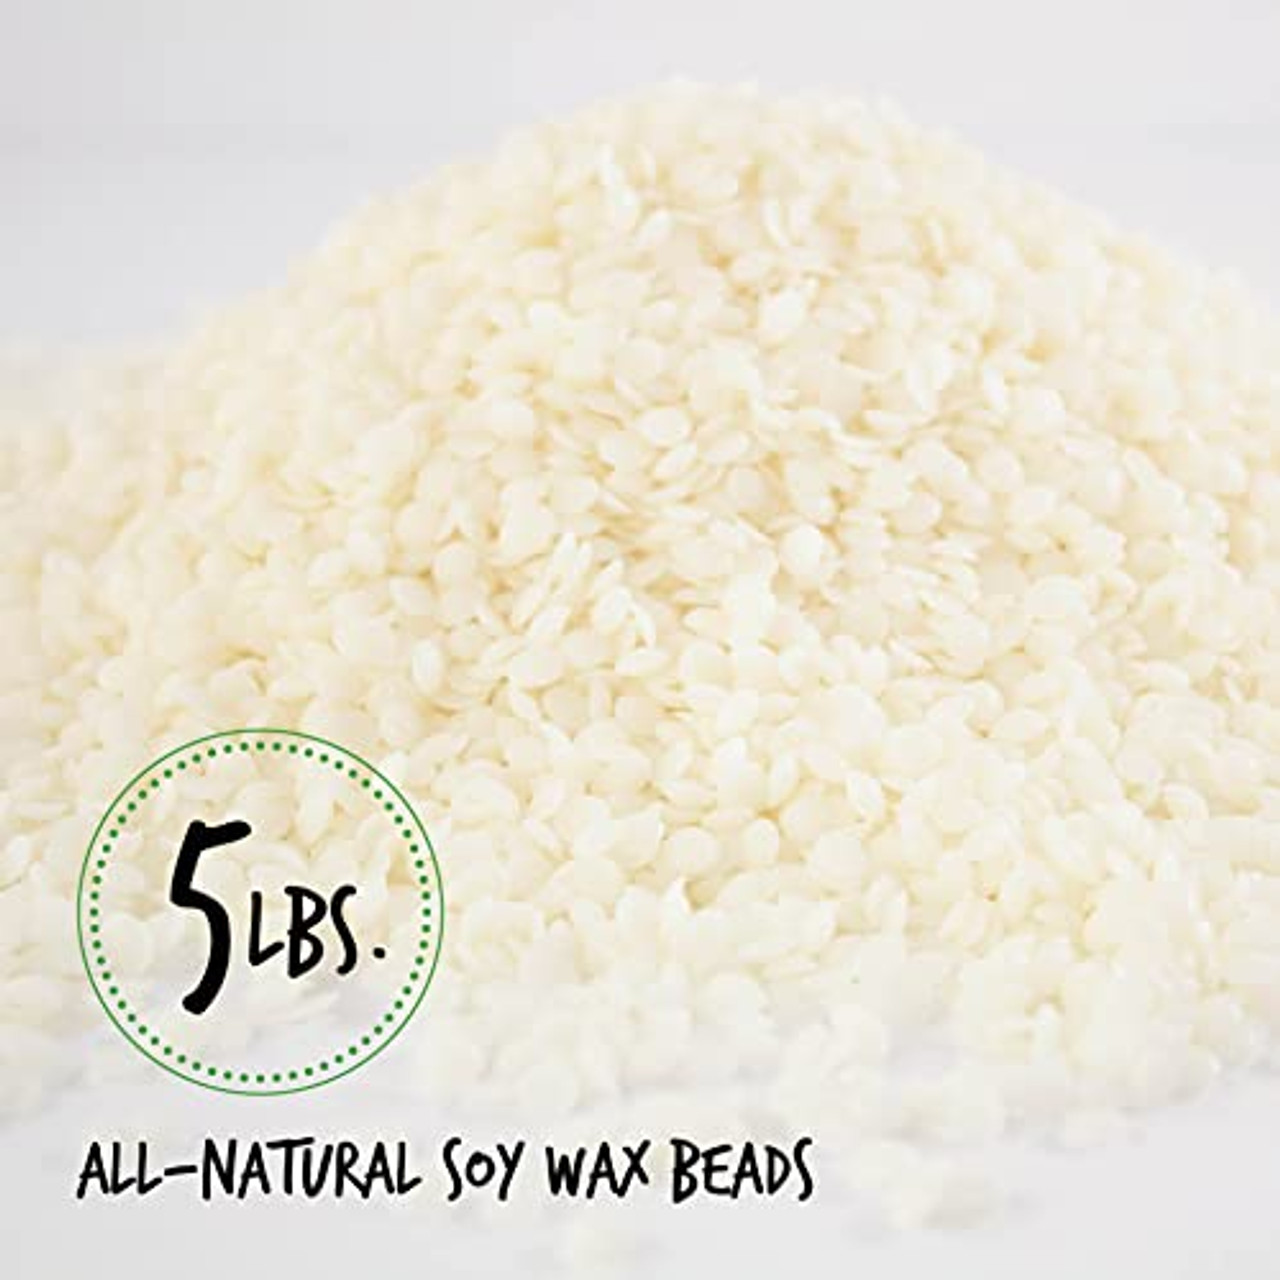 American Soy Organics- 5 lb of Freedom Soy Wax Beads for Candle Making –  Microwavable Soy Wax Beads – Premium Soy Candle Making Supplies